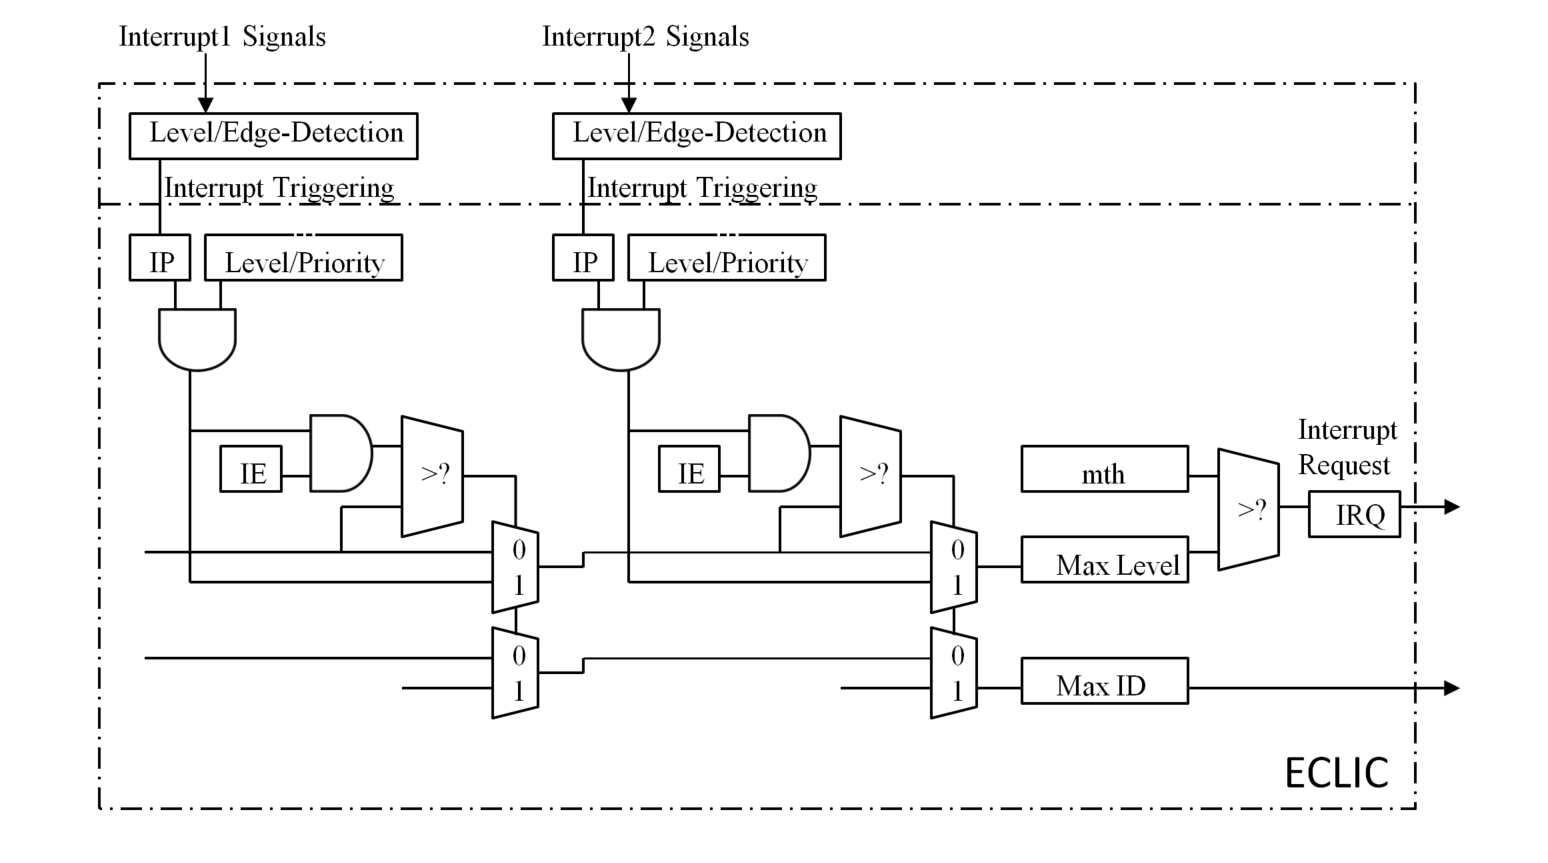 The logic structure of the ECLIC unit